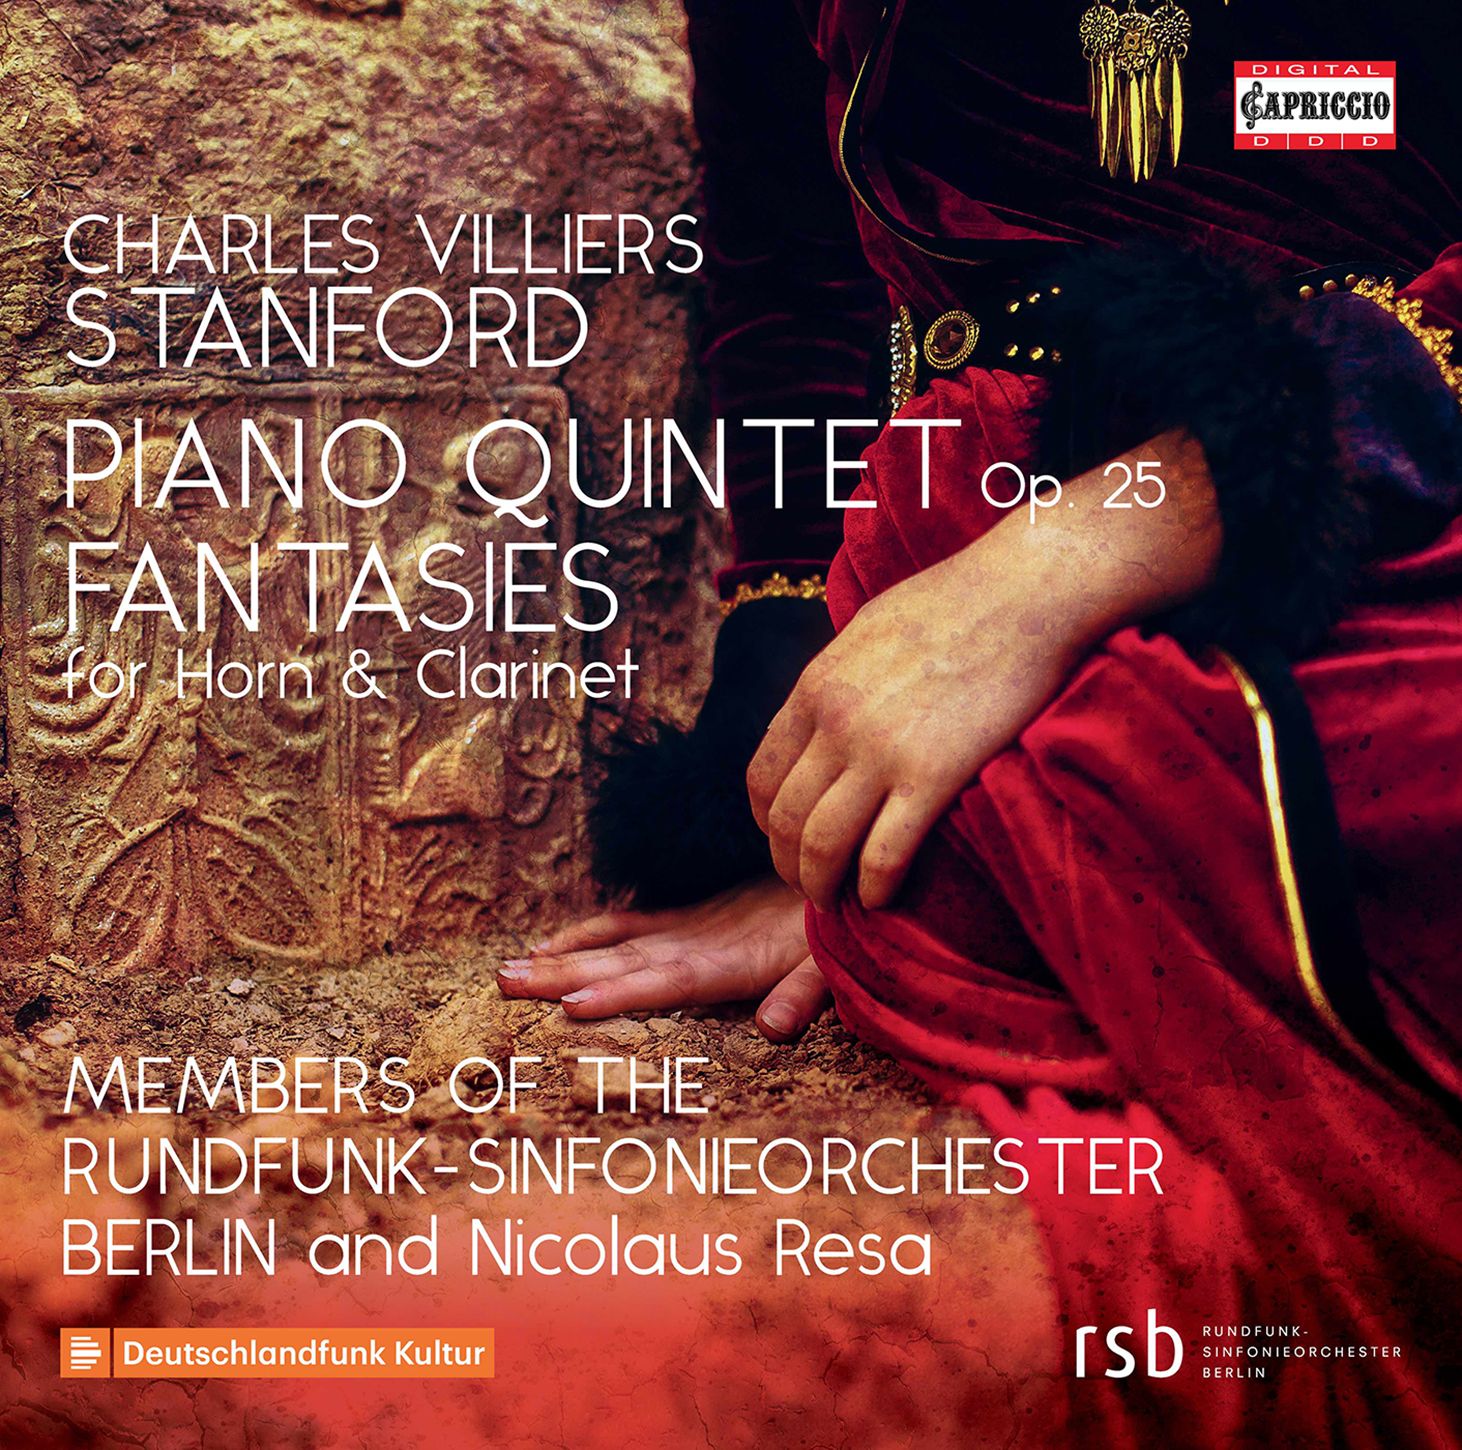 Stanford Piano Quintet and Fantasies